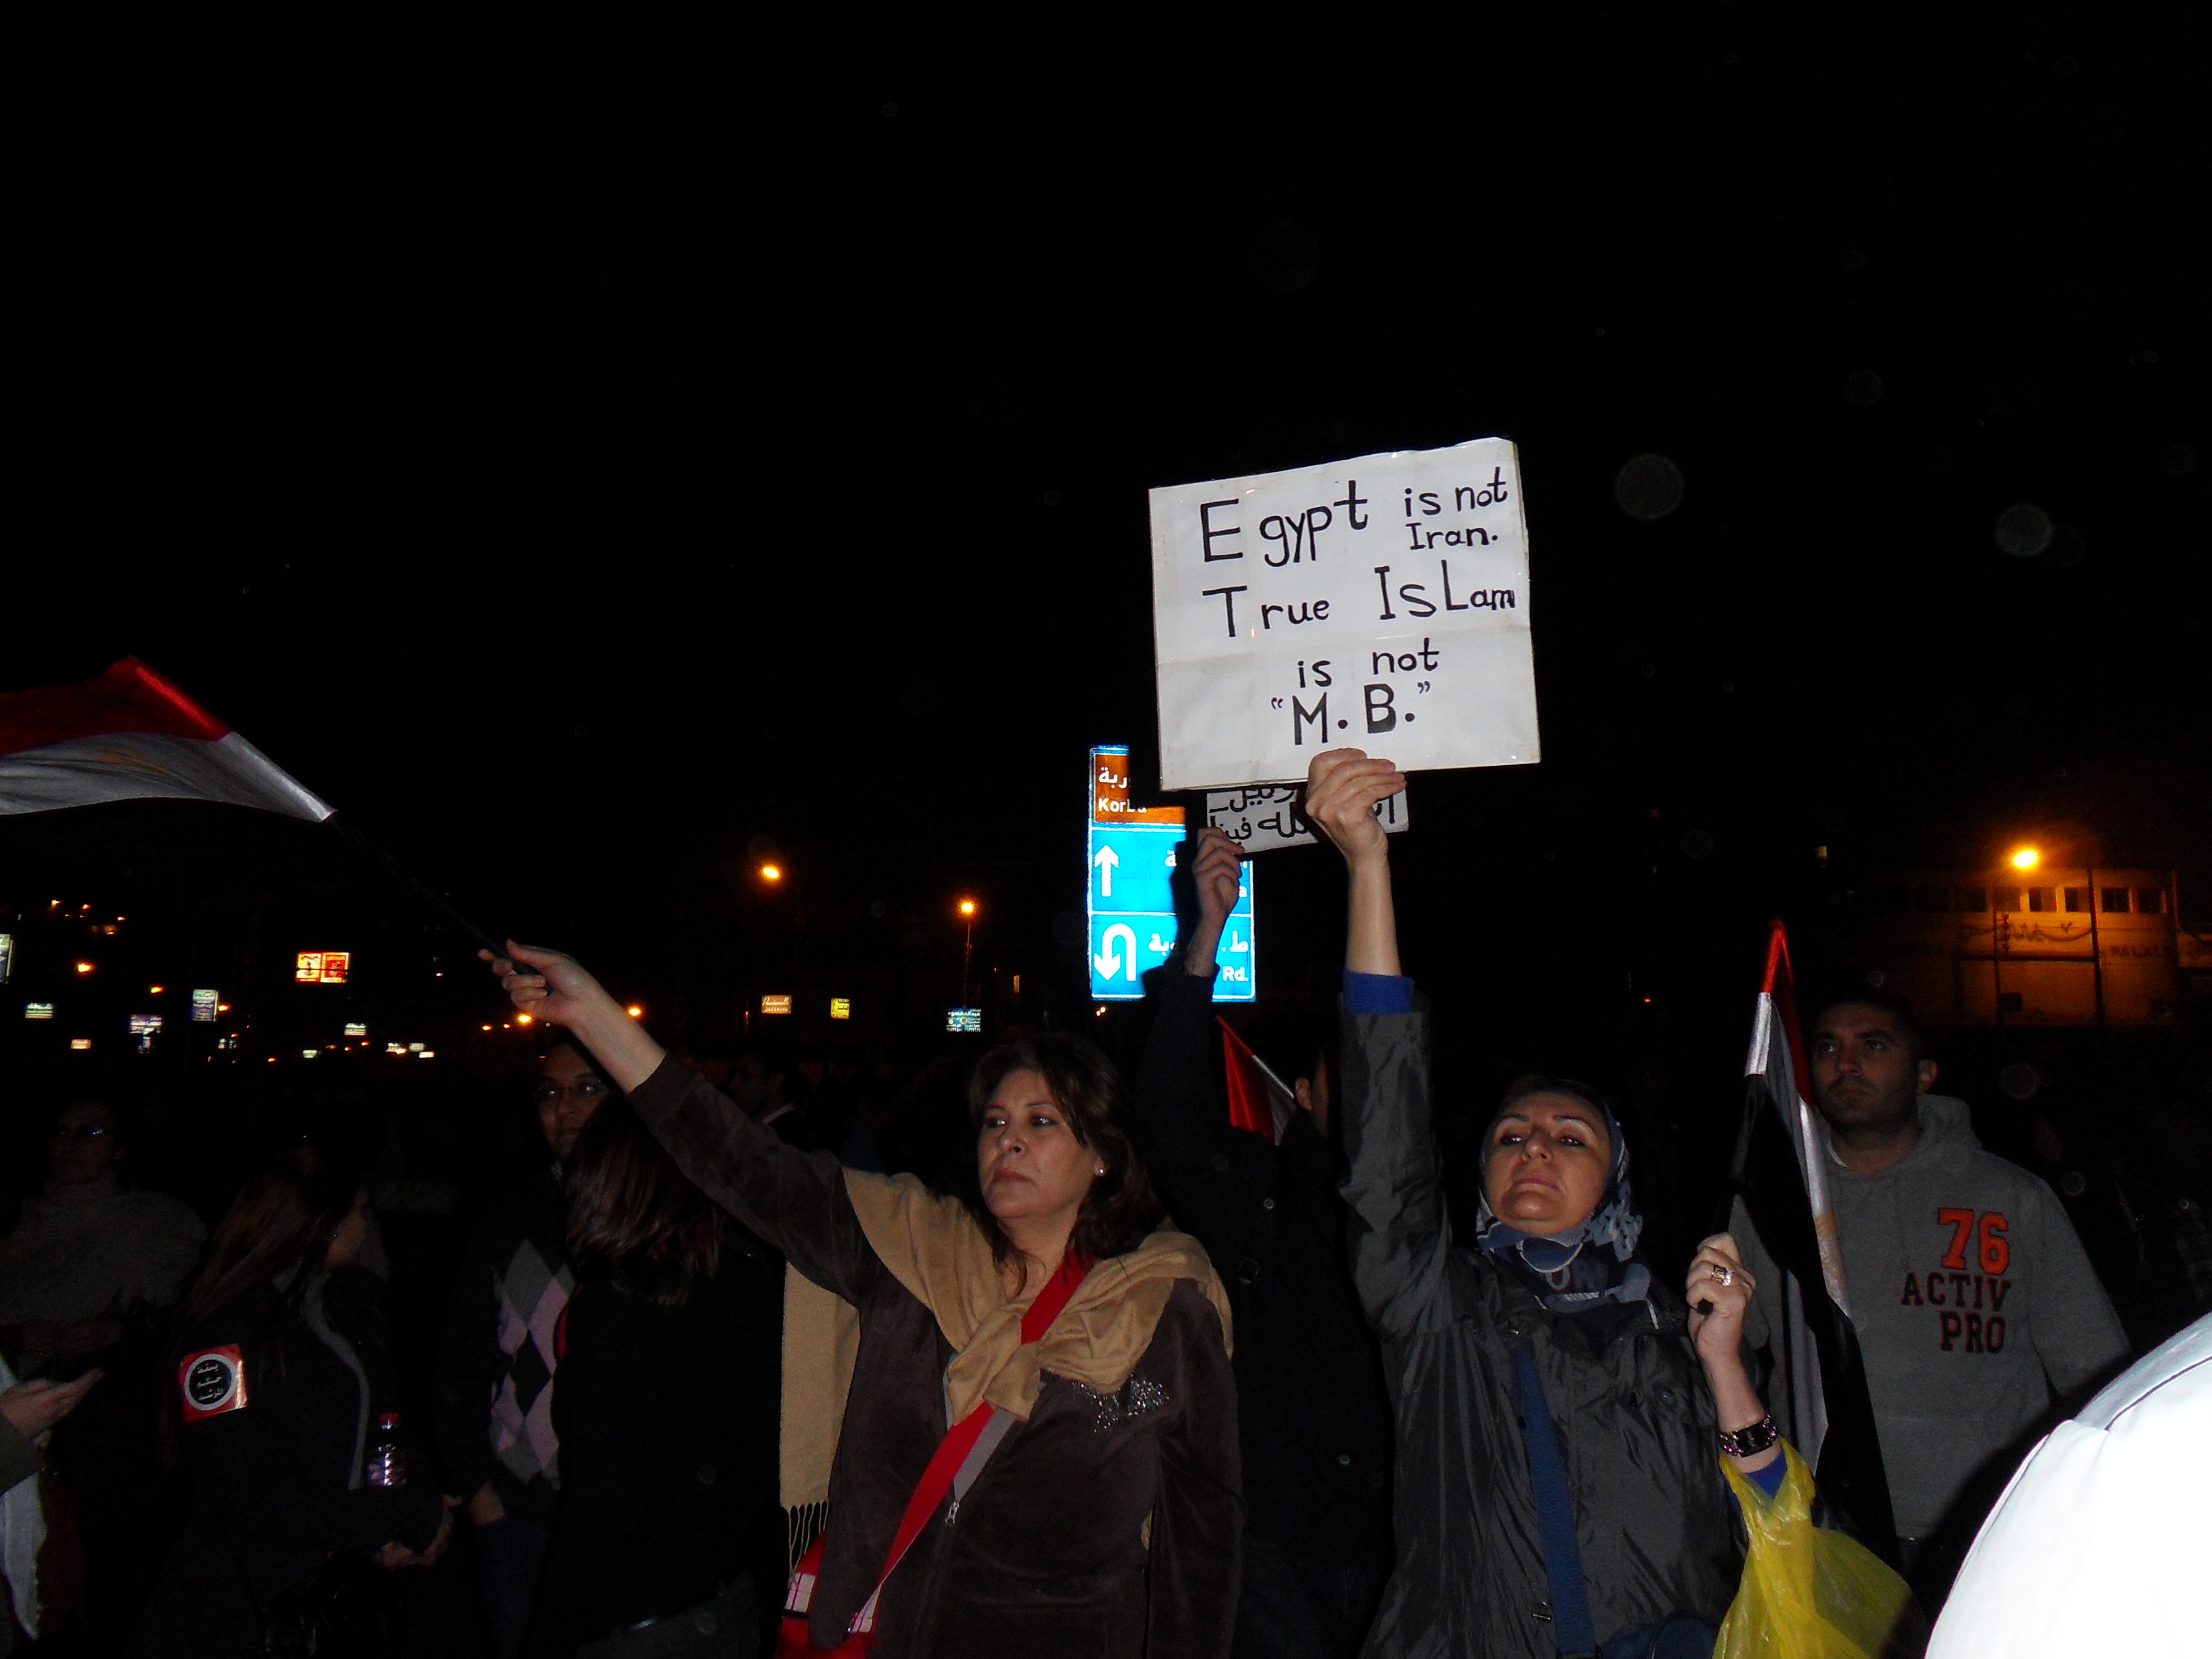 The women protesters were very passionate tonight and made sure their voices were being heard.